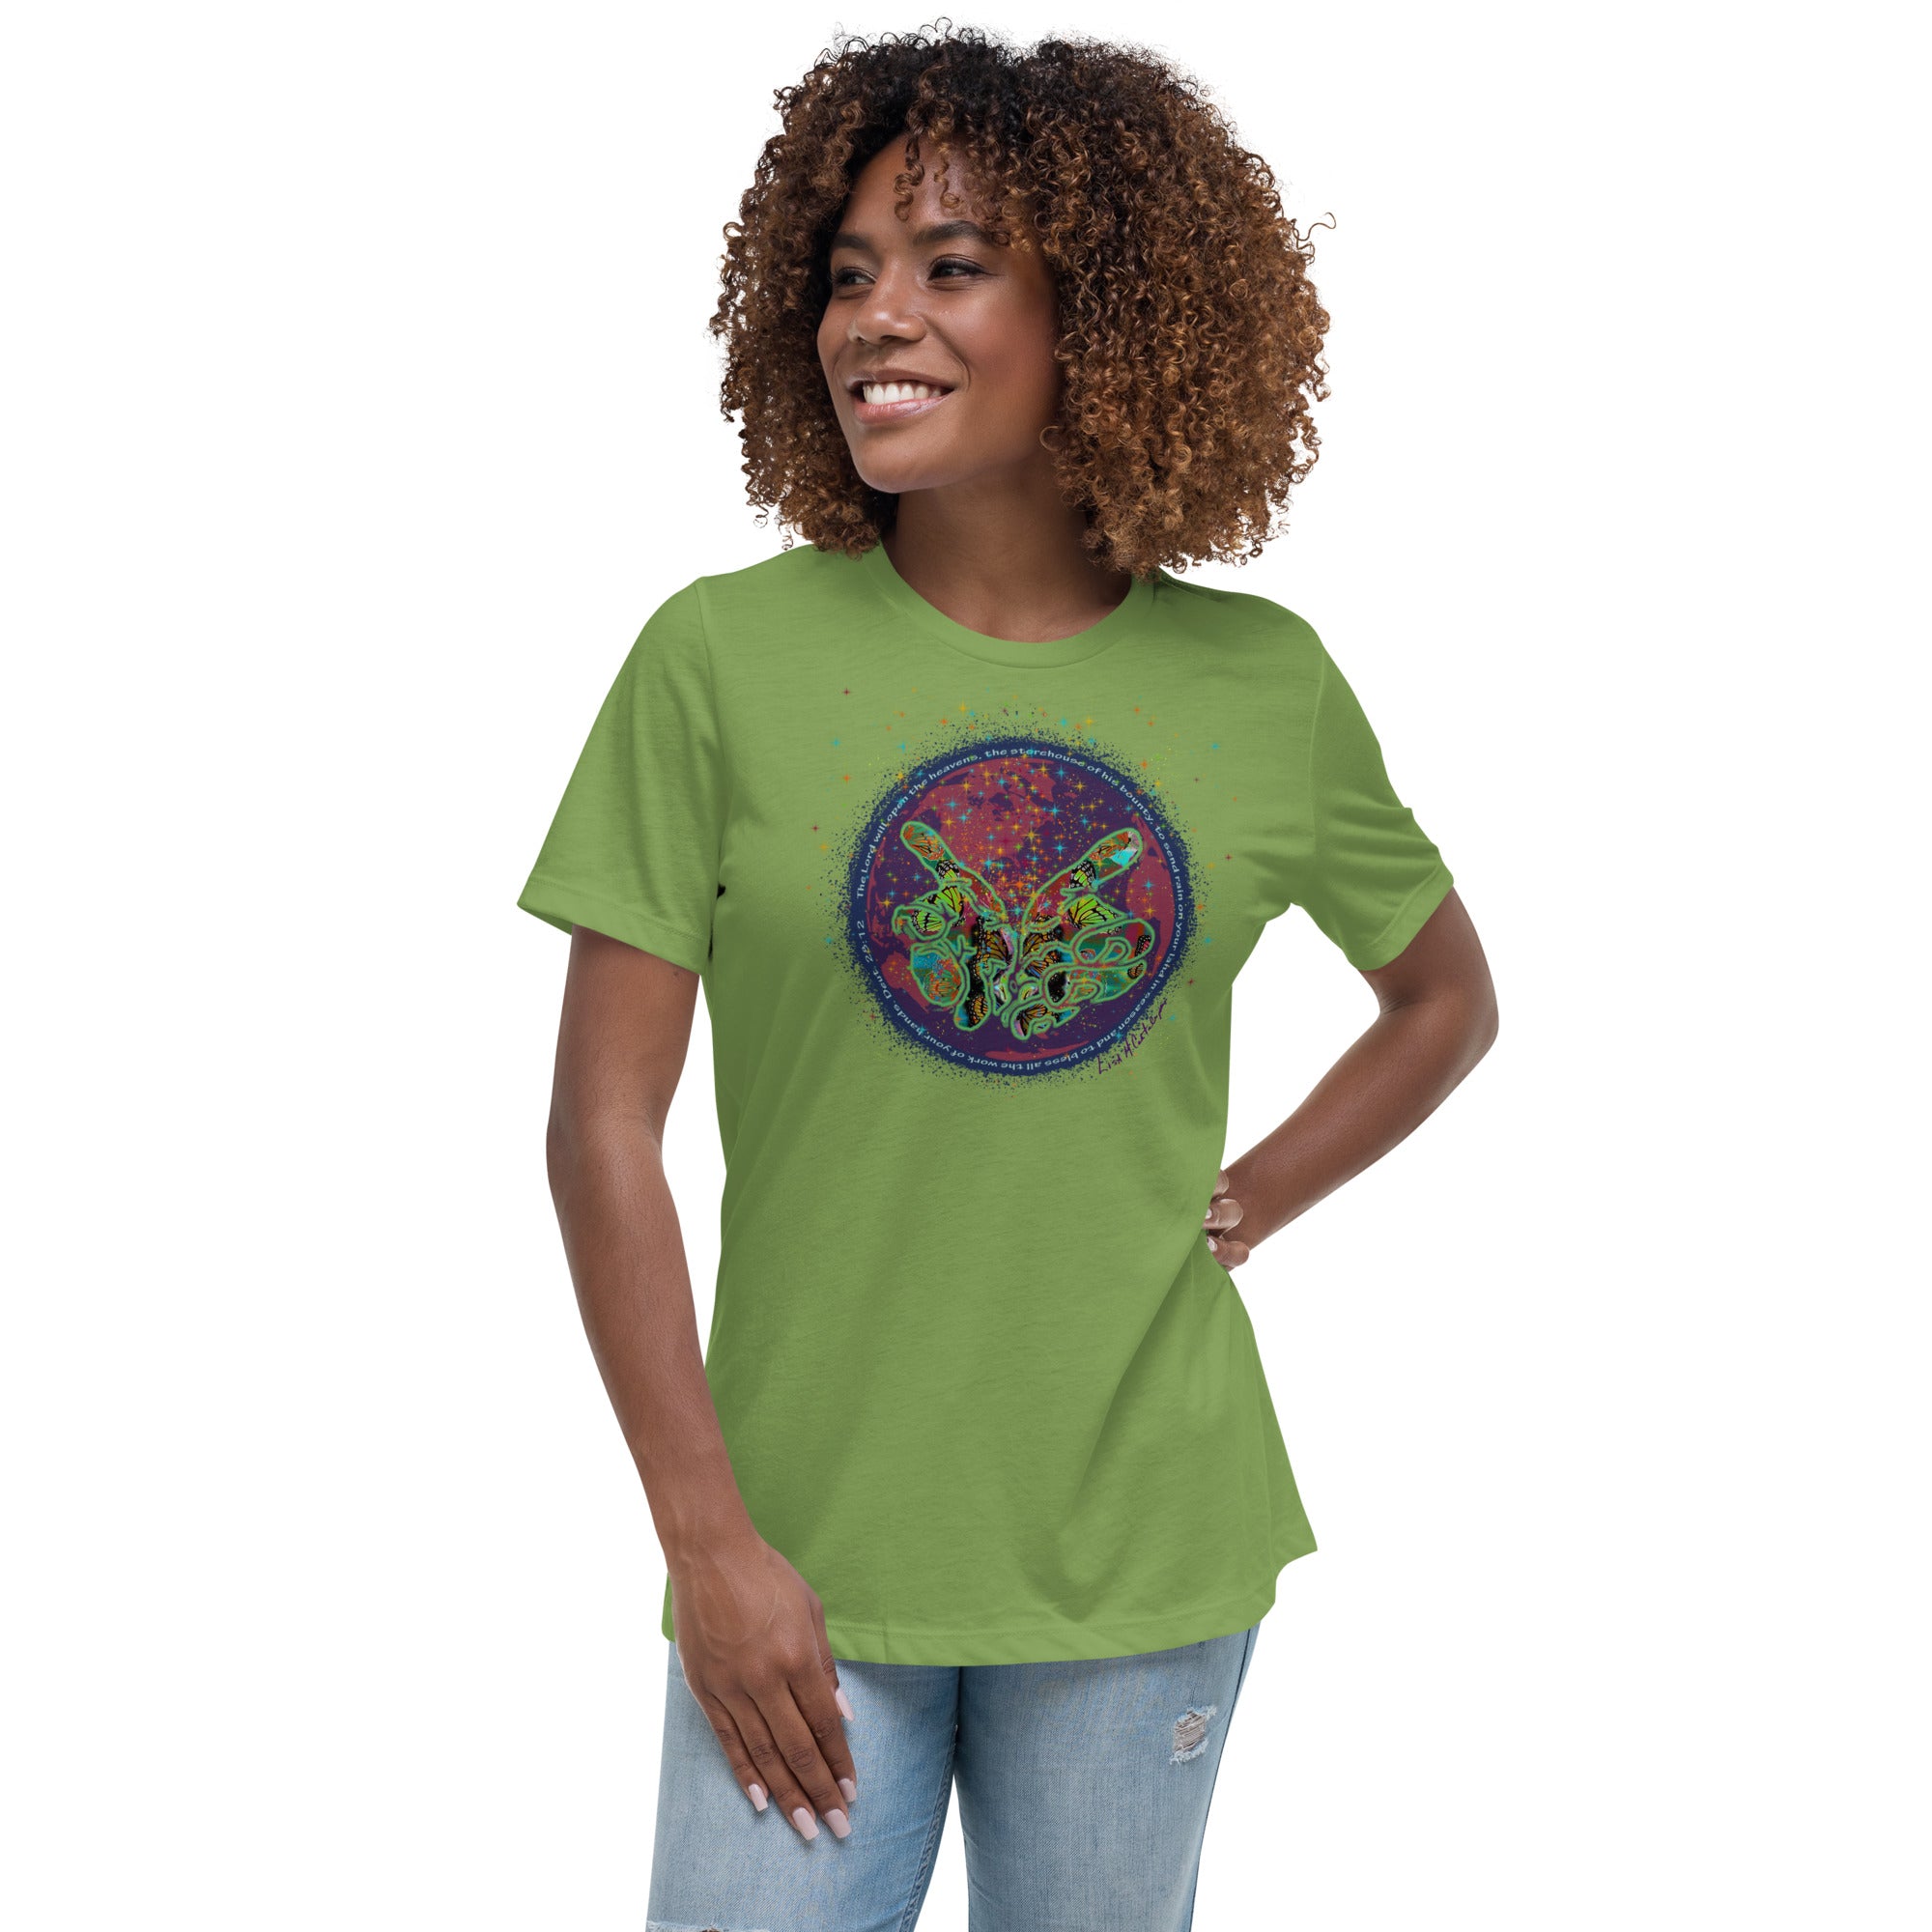 BLESSINGS of Work of HANDS ~ Women's  Graphic T-Shirt, Butterfly Word Art Short Sleeve Top